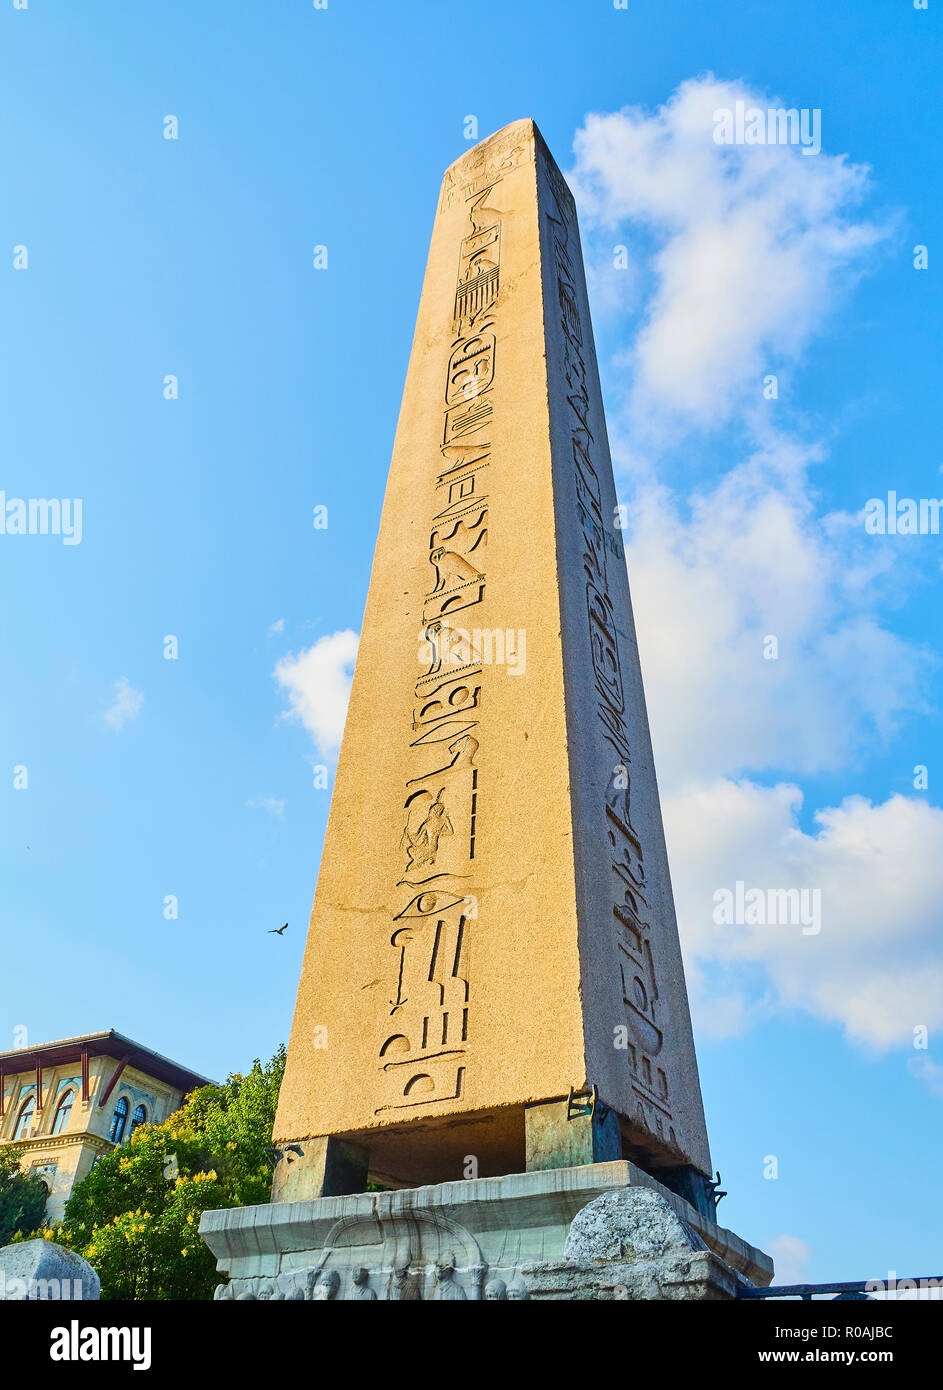 The Obelisk of Theodosius, an ancient Egyptian obelisk in the Hippodrome of Constantinople. SultanAhmet Square. Istanbul, Turkey. Stock Photo